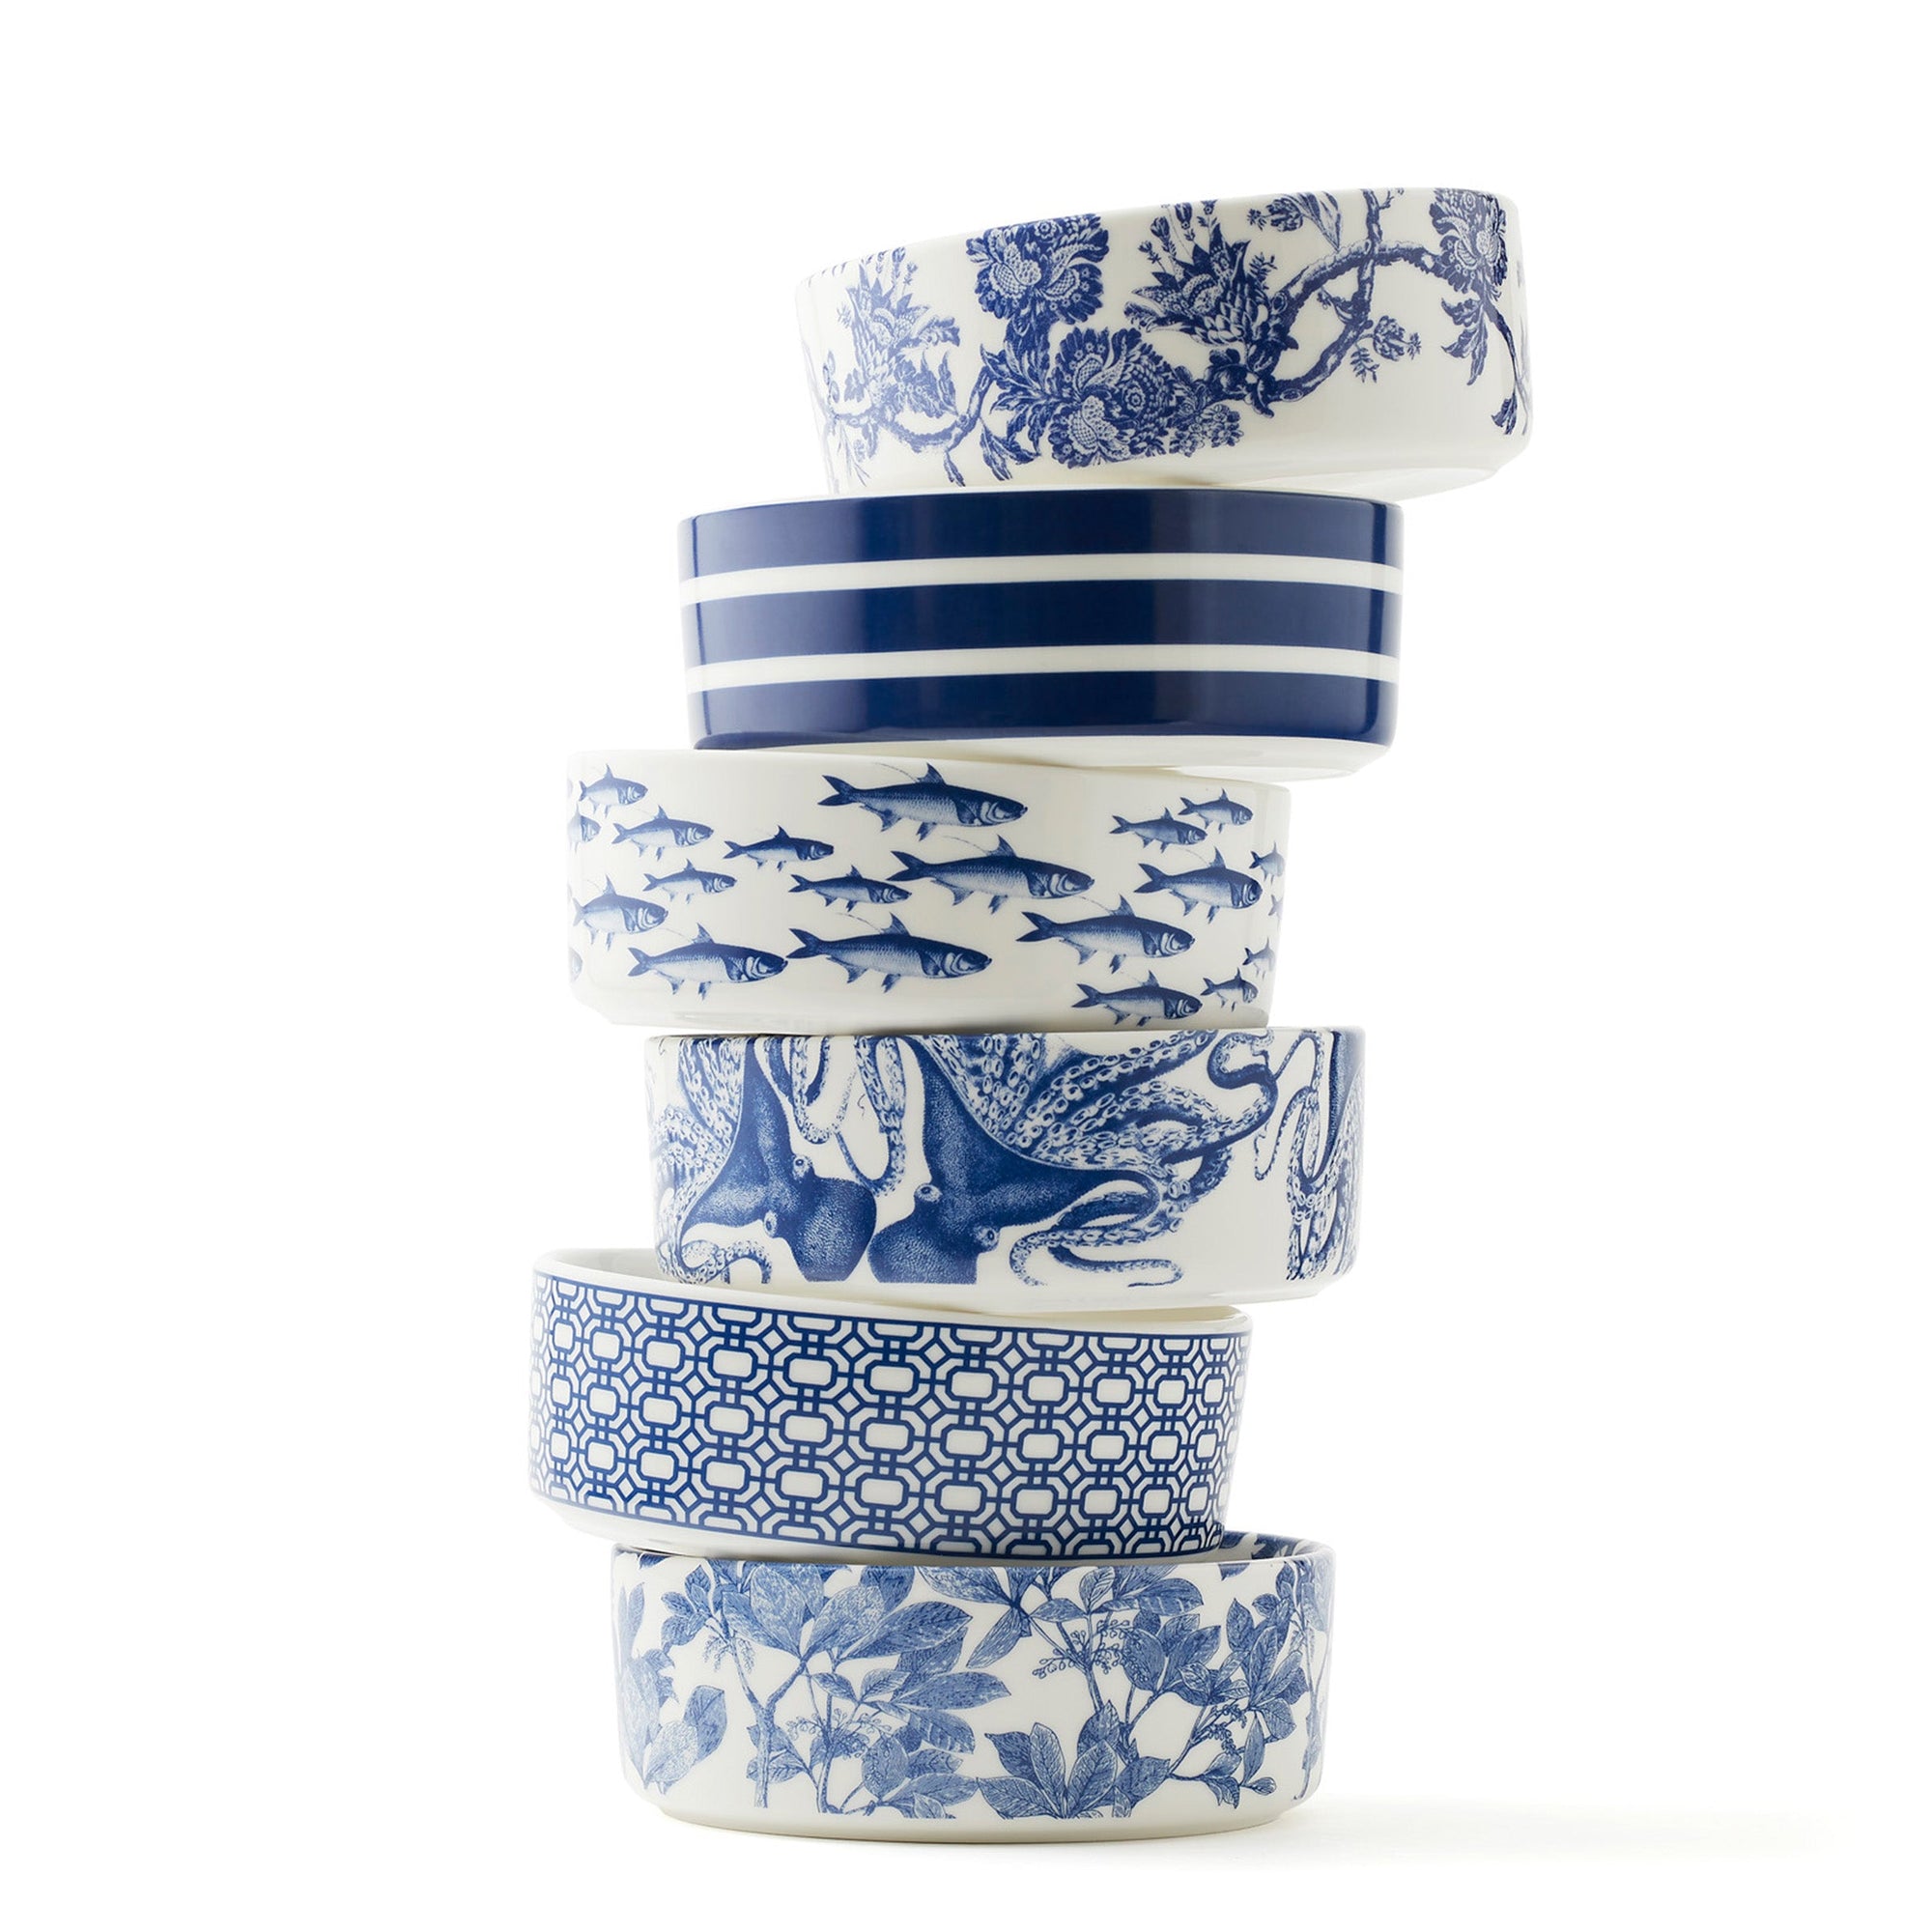 School of Fish Large Pet Bowls in blue and white porcelain from Caskata